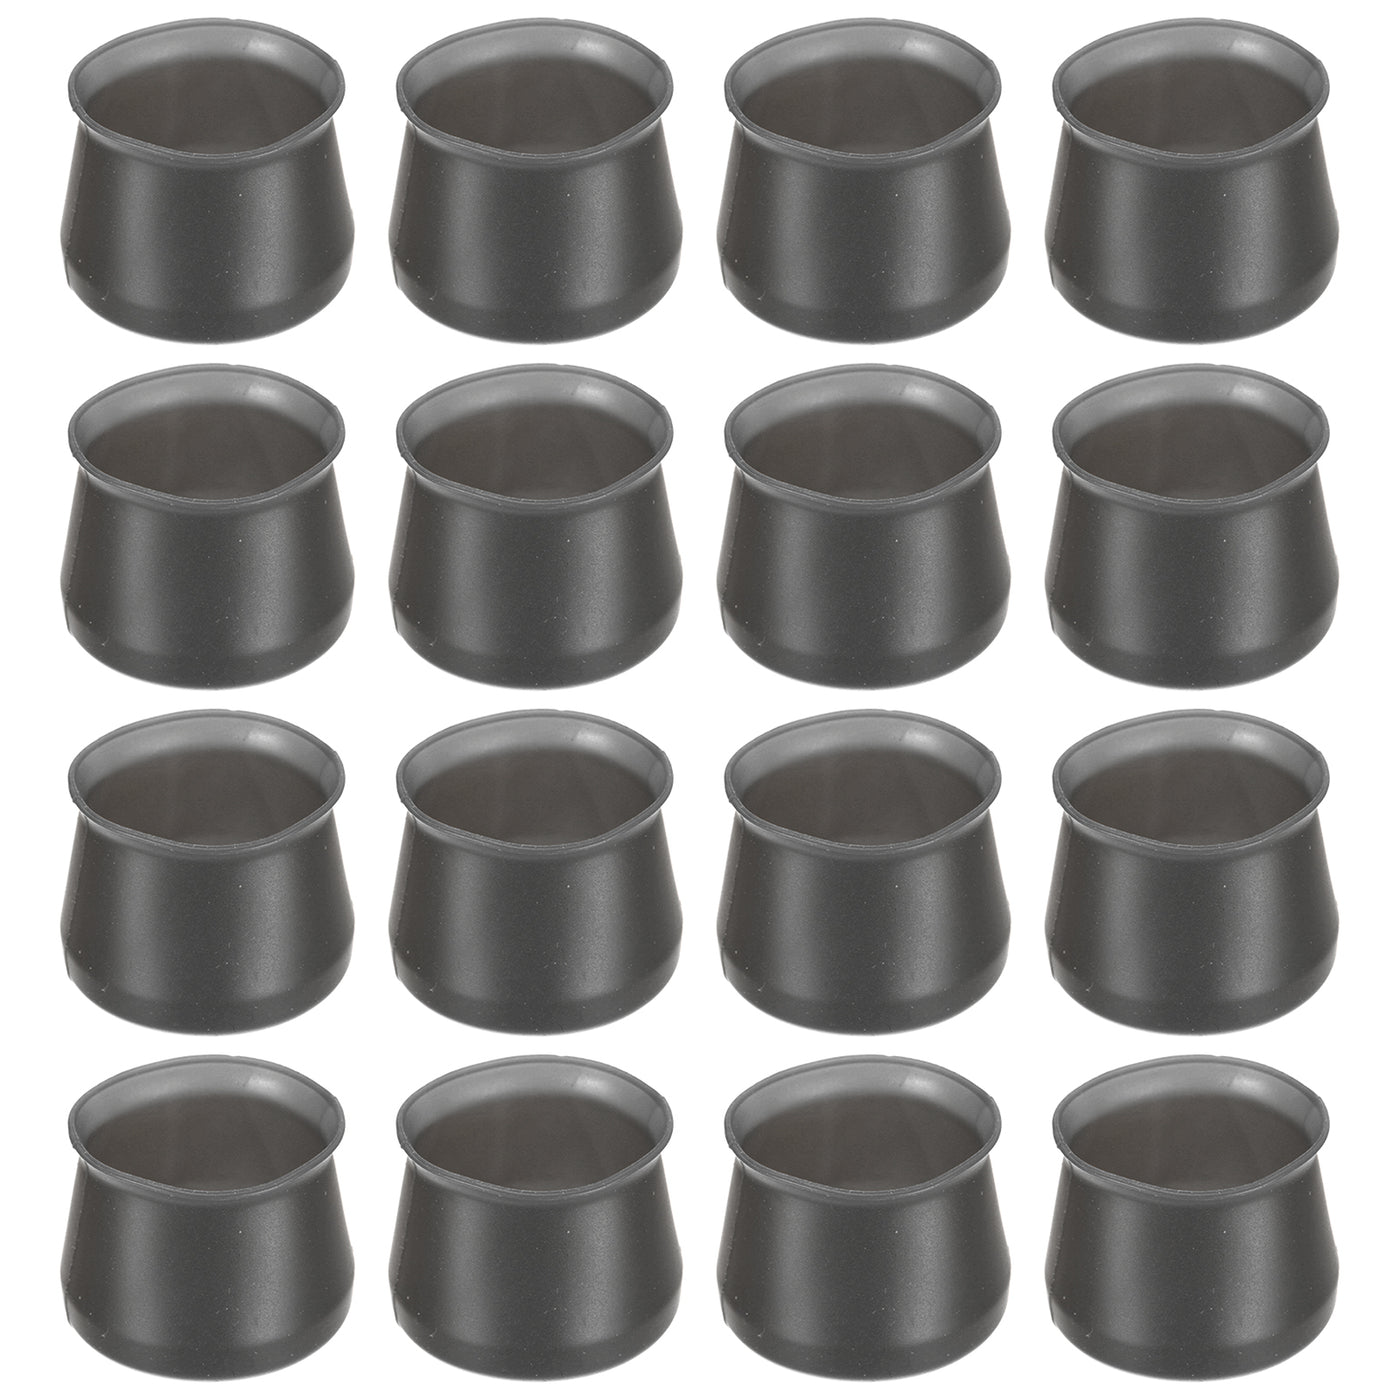 uxcell Uxcell Chair Leg Floor Protectors, 16Pcs 38mm/ 1.5" Silicone Chair Leg Cover Caps for Hardwood Floors (Black)